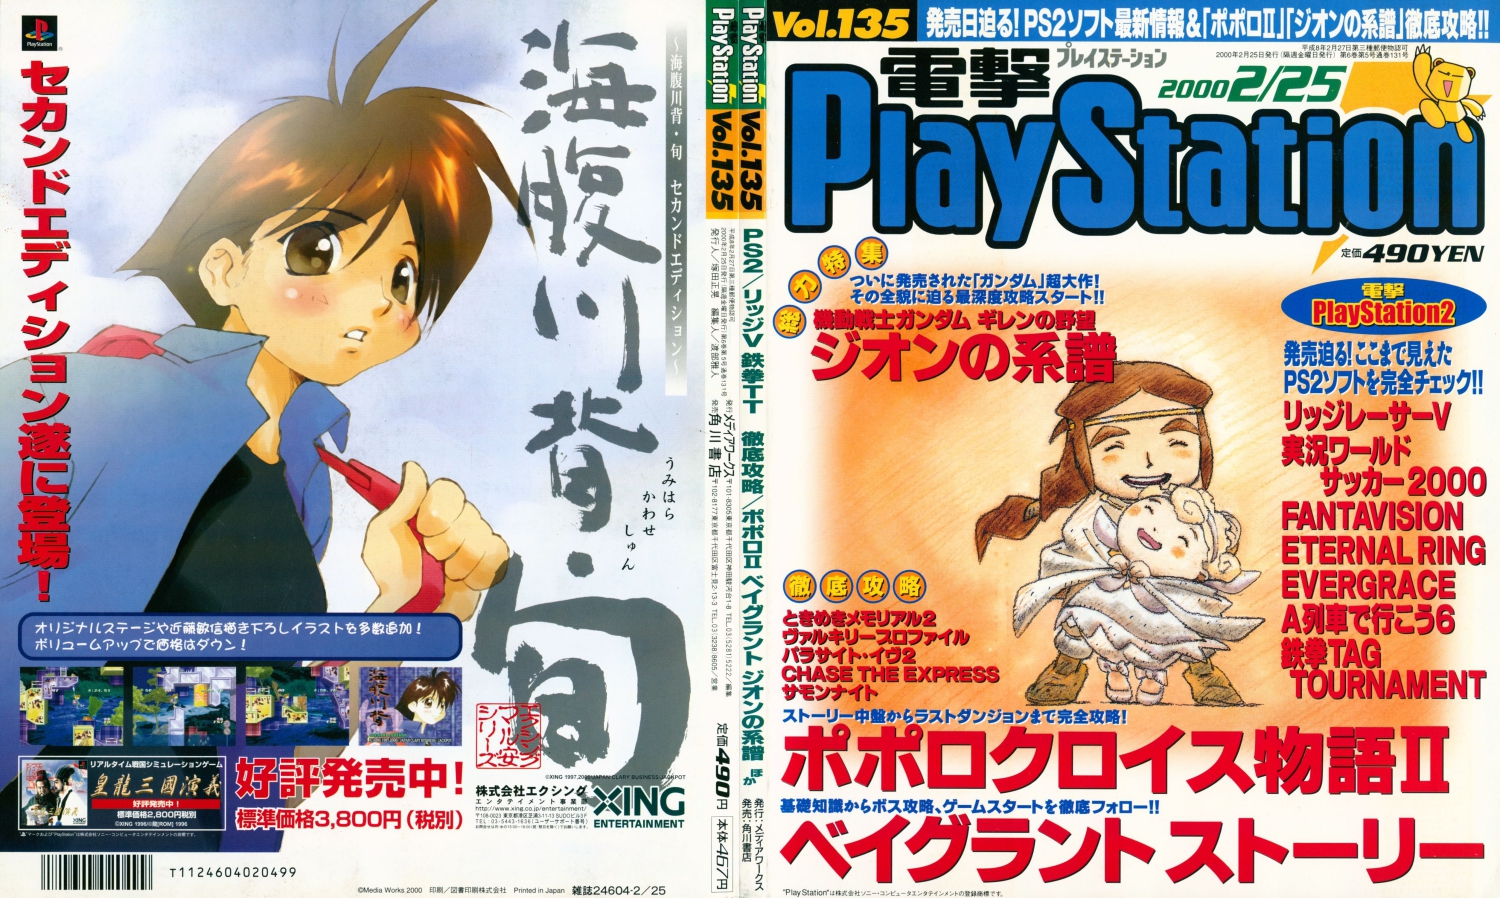 front and back cover scans of dengeki playstation vol 135 magazine. the front cover has a pencil colour-like simple illustration of a character with brown braided hair and bushy eyebrows hugging a smaller fluffy white character. they are enveloped in a yellow aura, alongside many japanese headlines. the back cover is an advertisement for umihara kawase, showing the titular character with short brown hair, blue-black outfit and red bag against a blue sky. there is flavor text, the game's logo along with game screenshots.